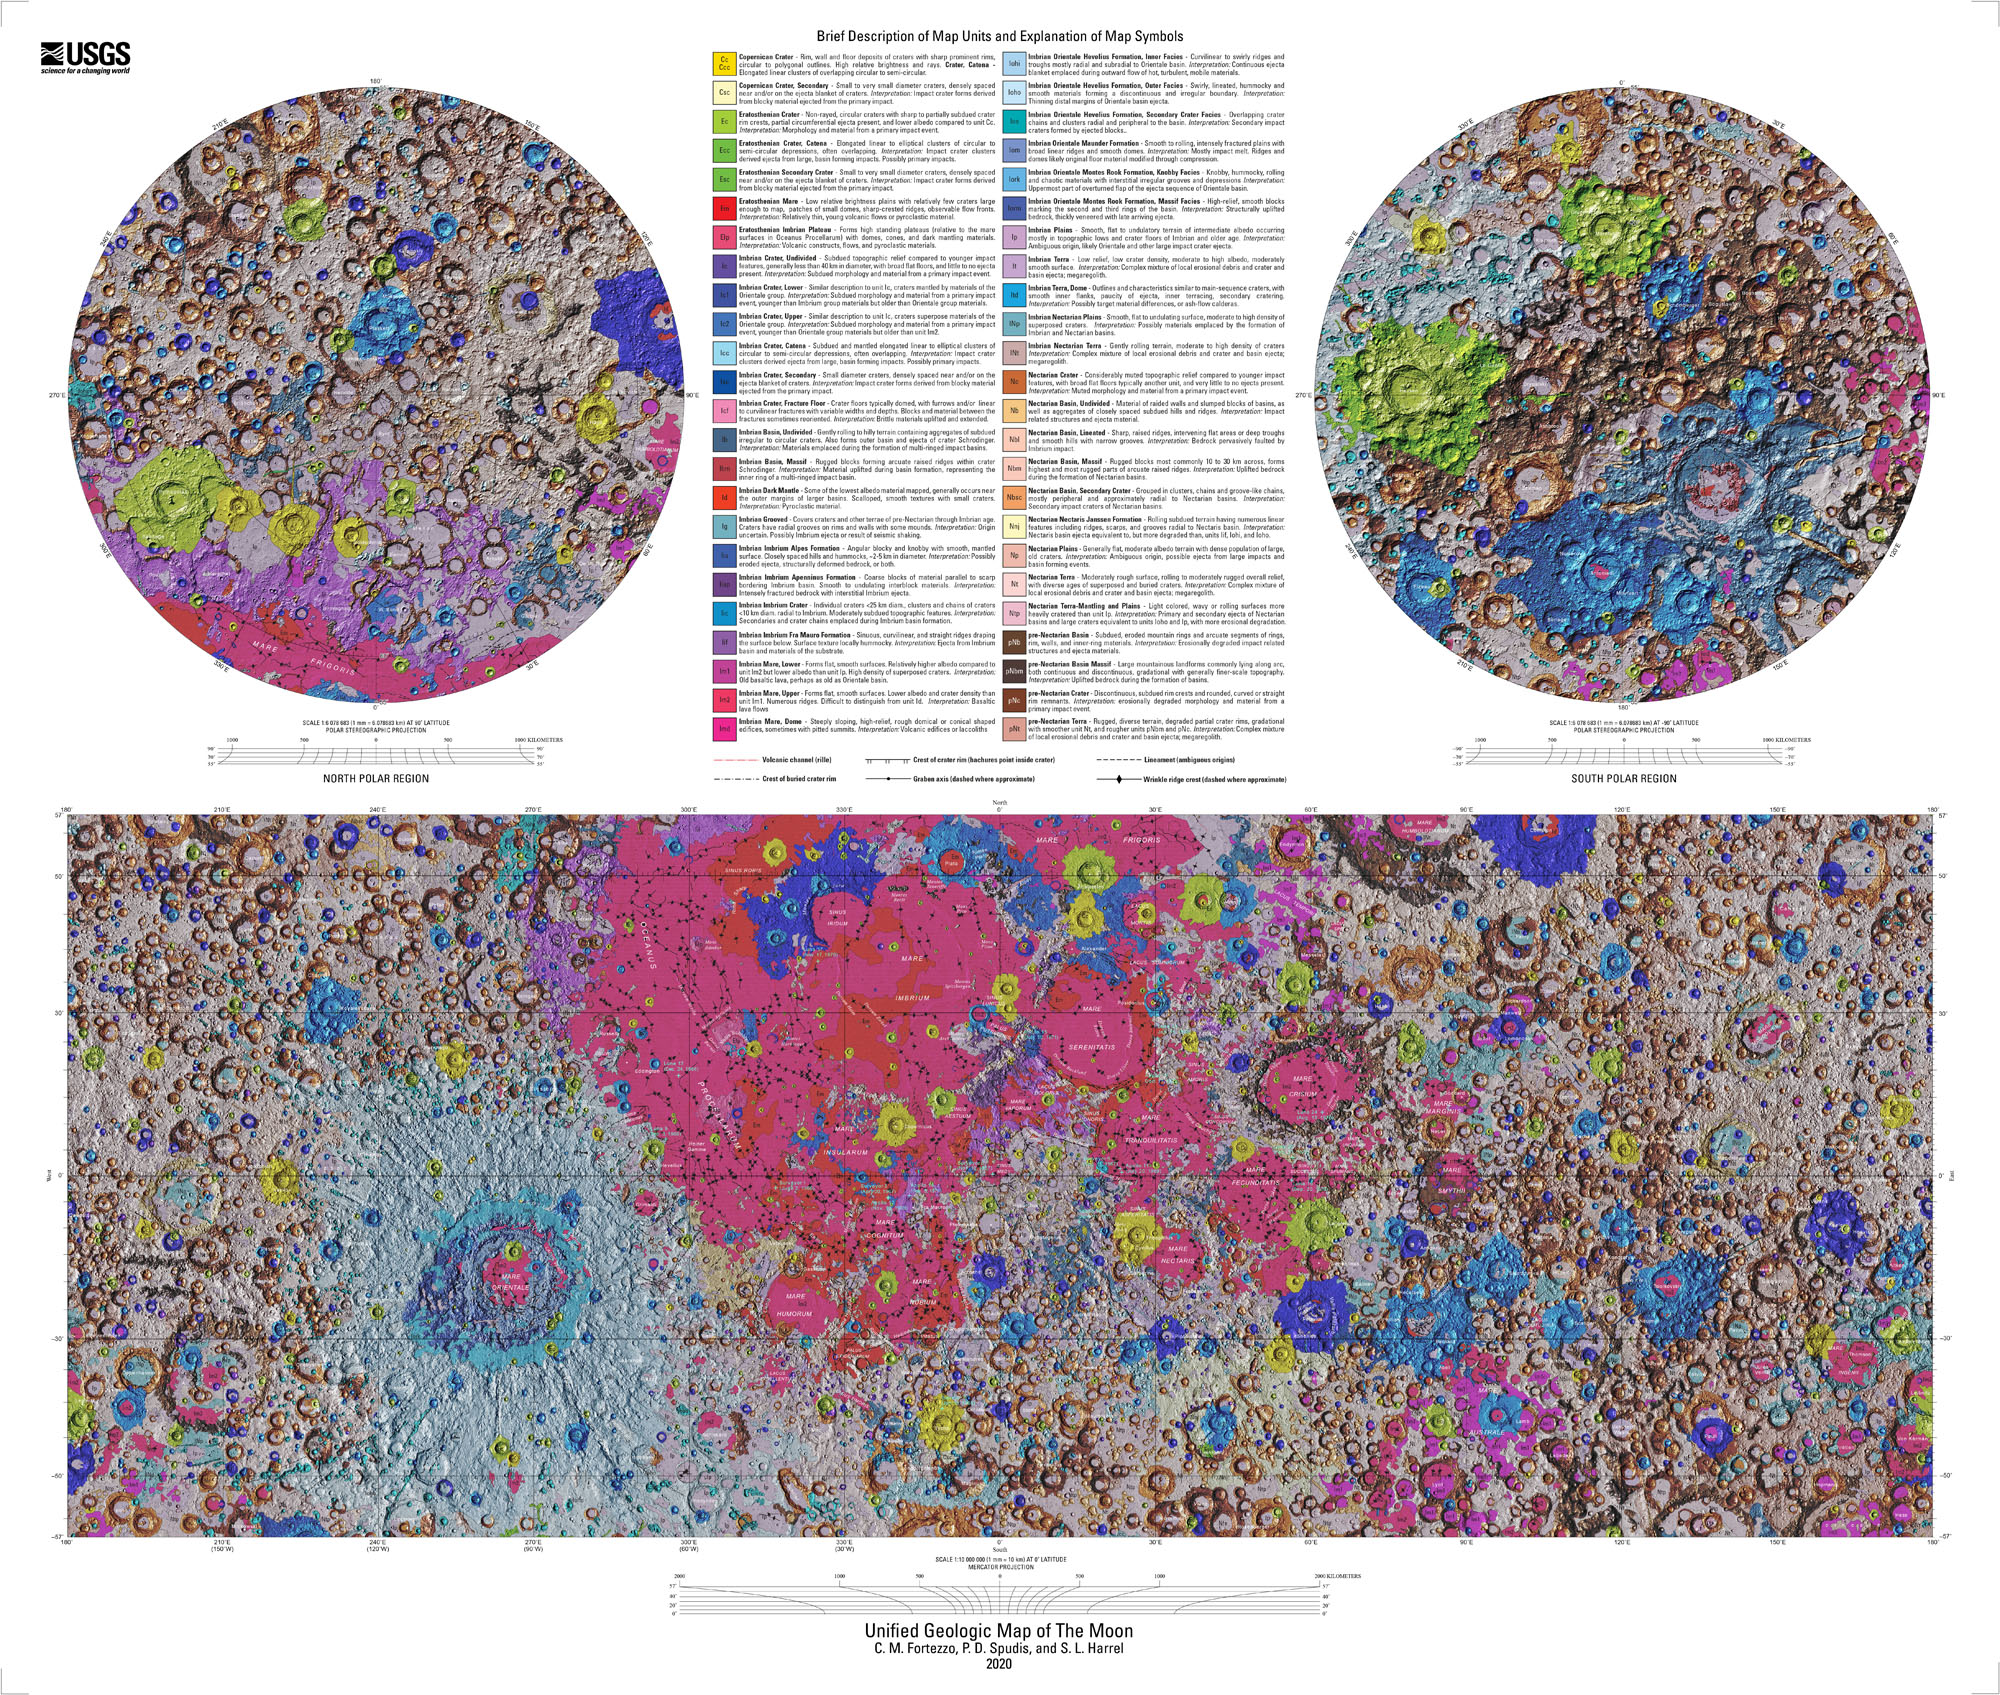 Unified Geologic Map of the Moon, 1:5M (2020)